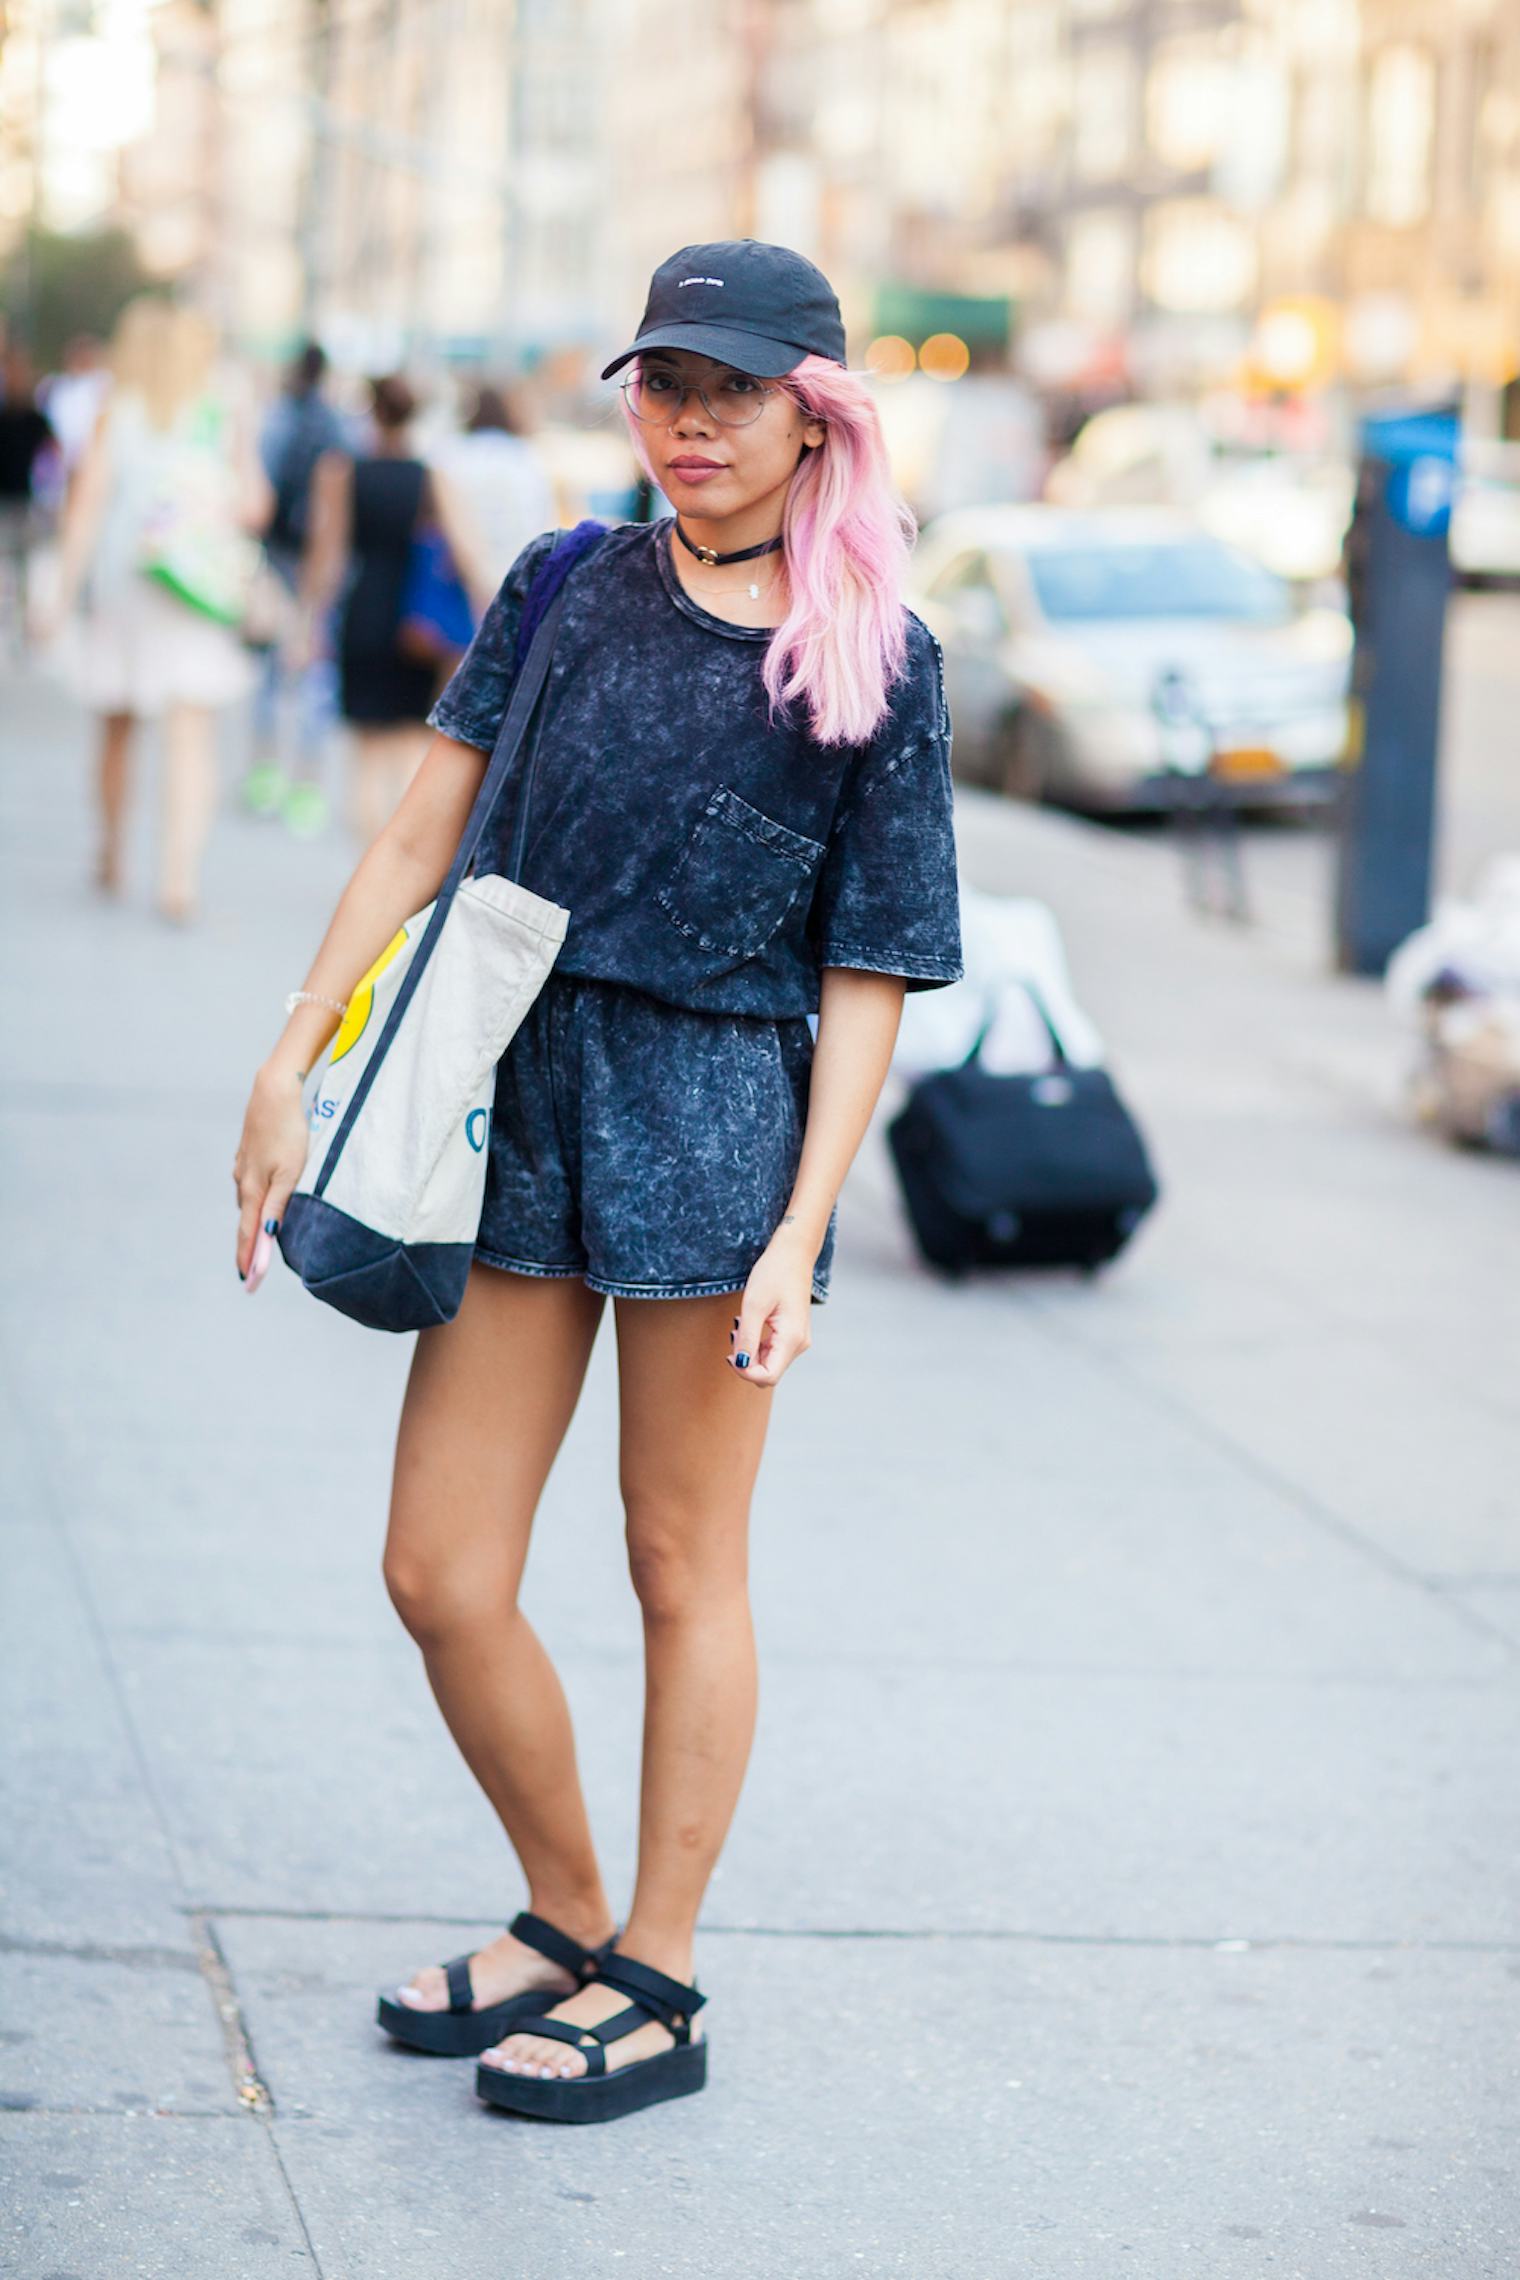 The Very Best End-Of-Summer NYC Street Style